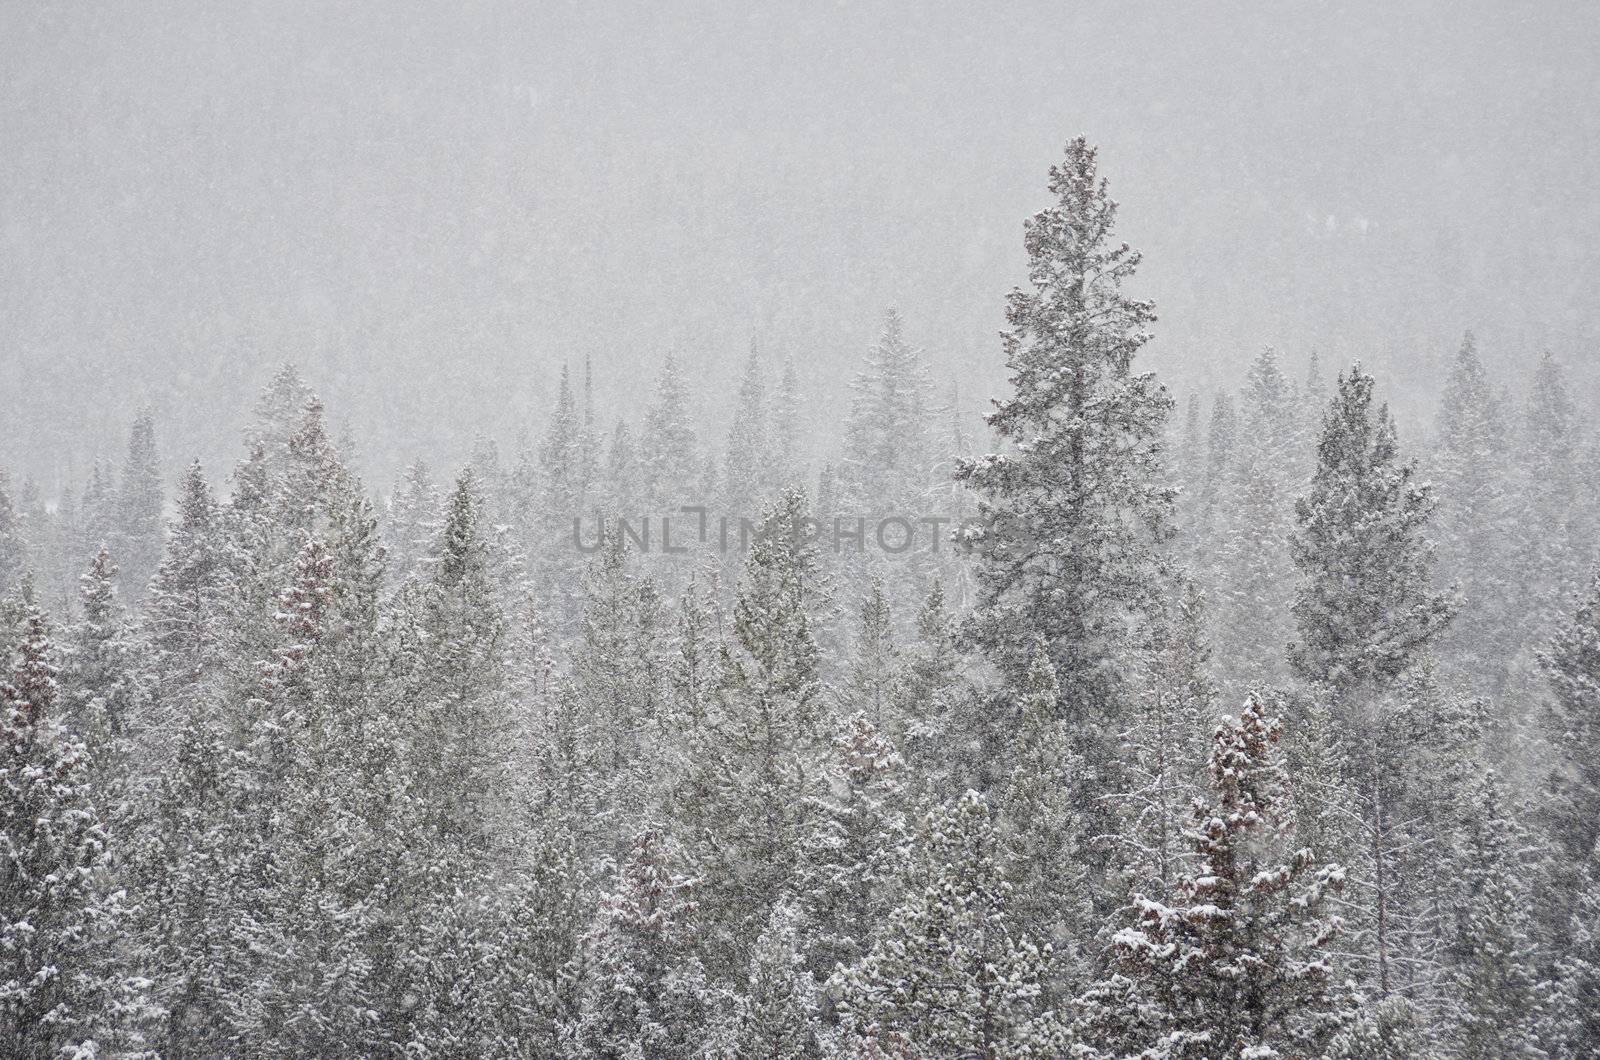 Forest and winter snow storm, Hyalite Canyon, Gallatin National Forest, Montana, USA